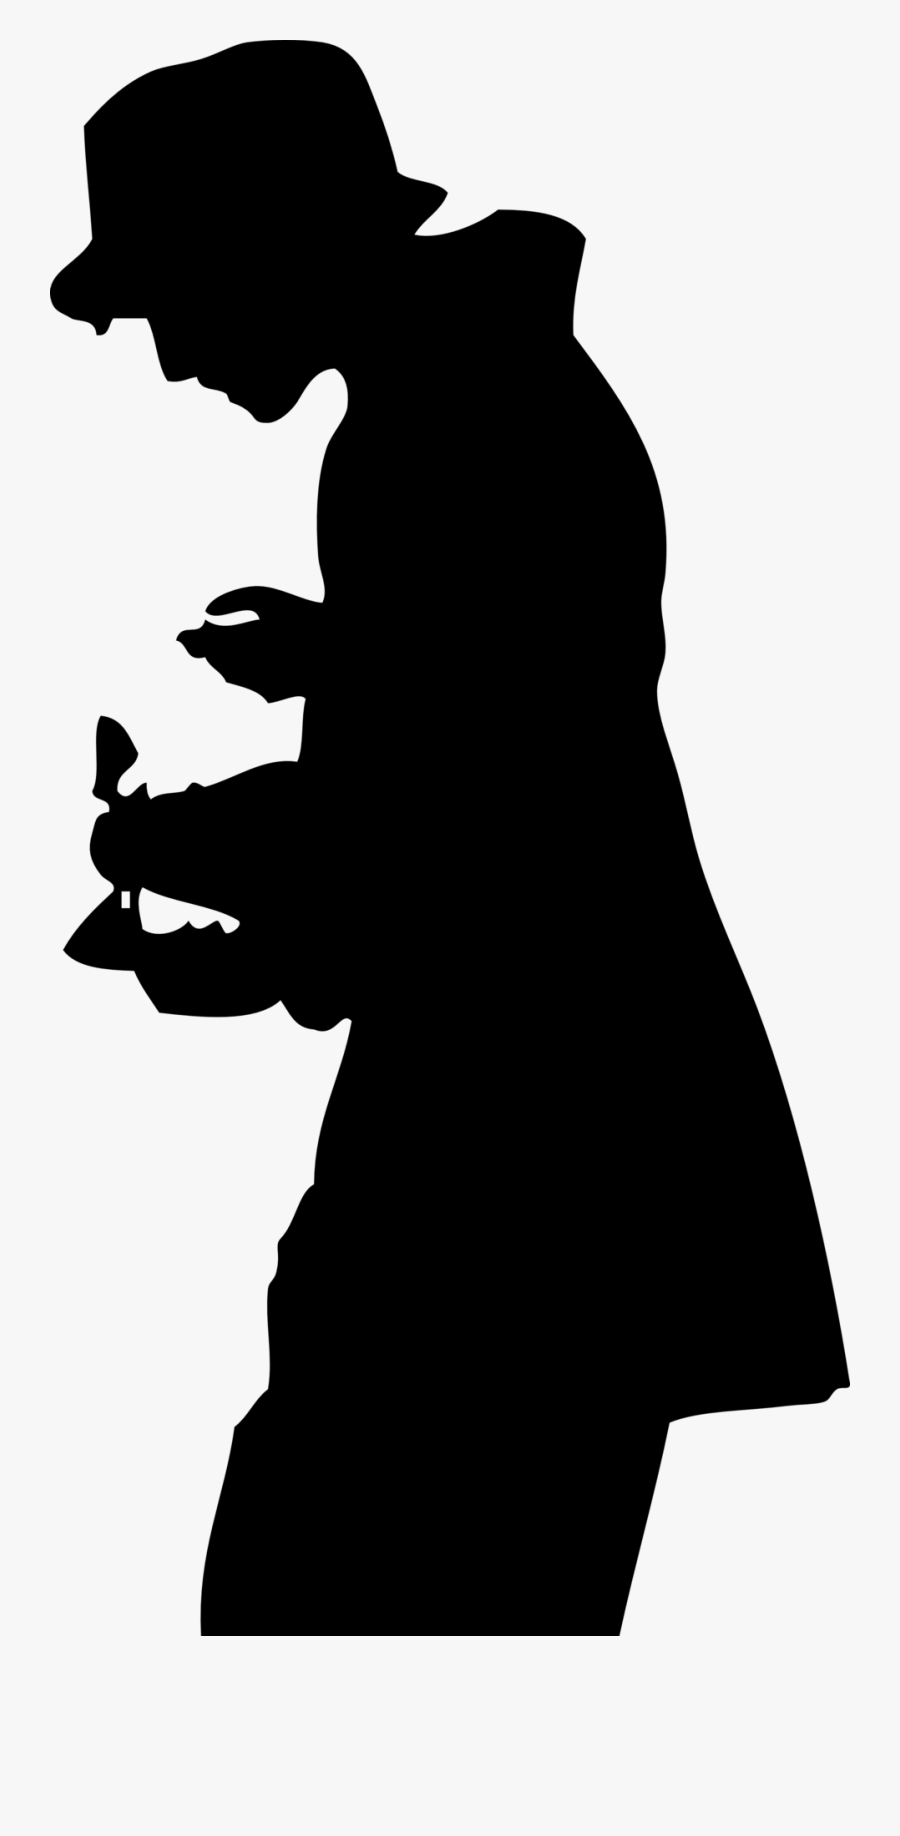 Brownie User - Man With Hat Silhouette Png, Transparent Clipart